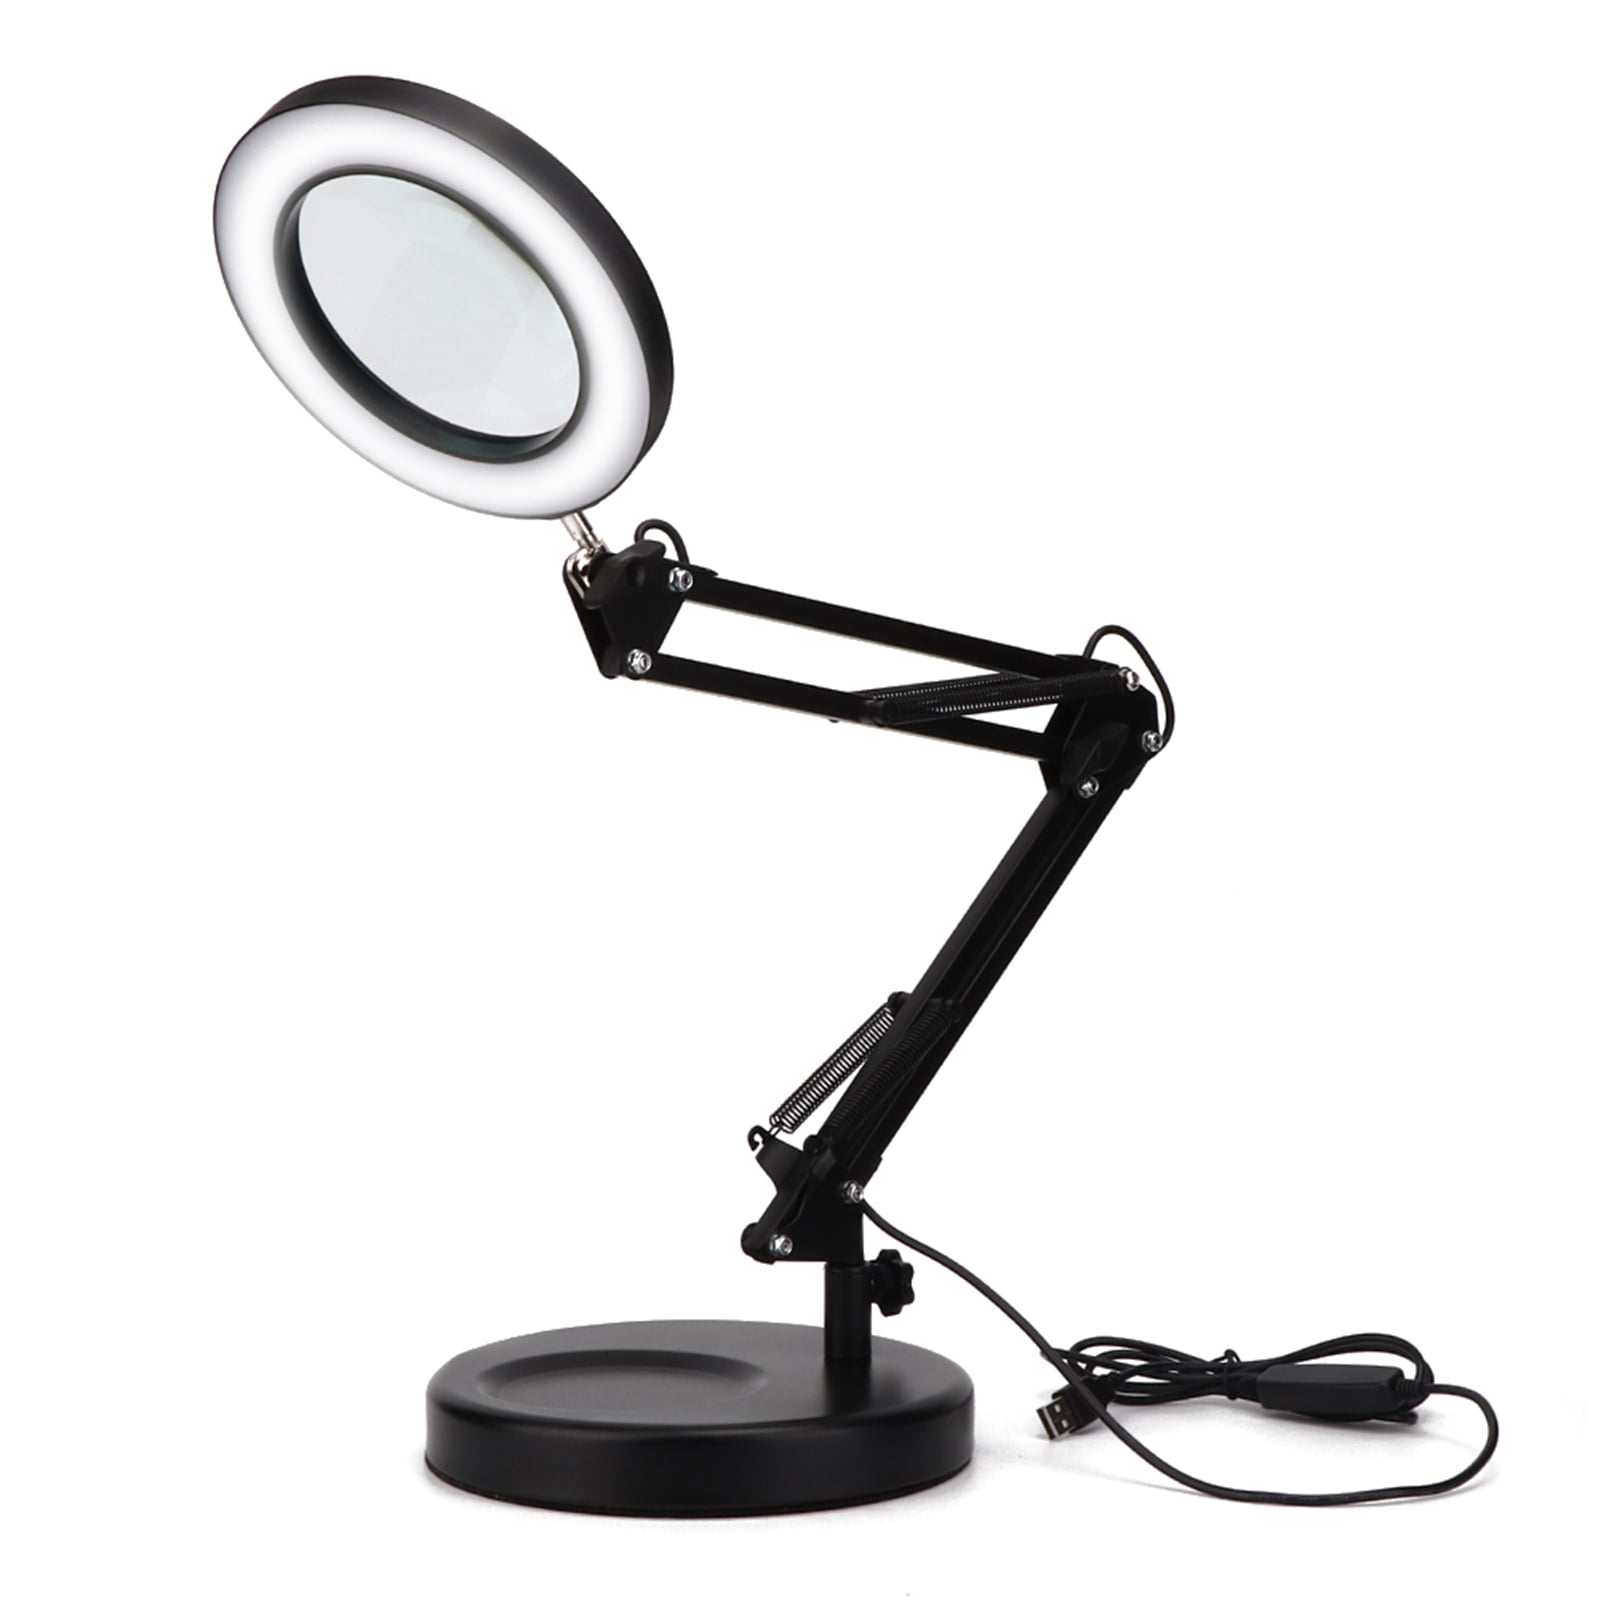 Creative craft magnifying glass Floor Standing Magnifying Lamp Adjustable Swivel Arm 8x Magnifier Lamp Light For Skincare Beauty Manicure Tattoo Salon Spa With Rolling Floor Stand magnifier for readi 